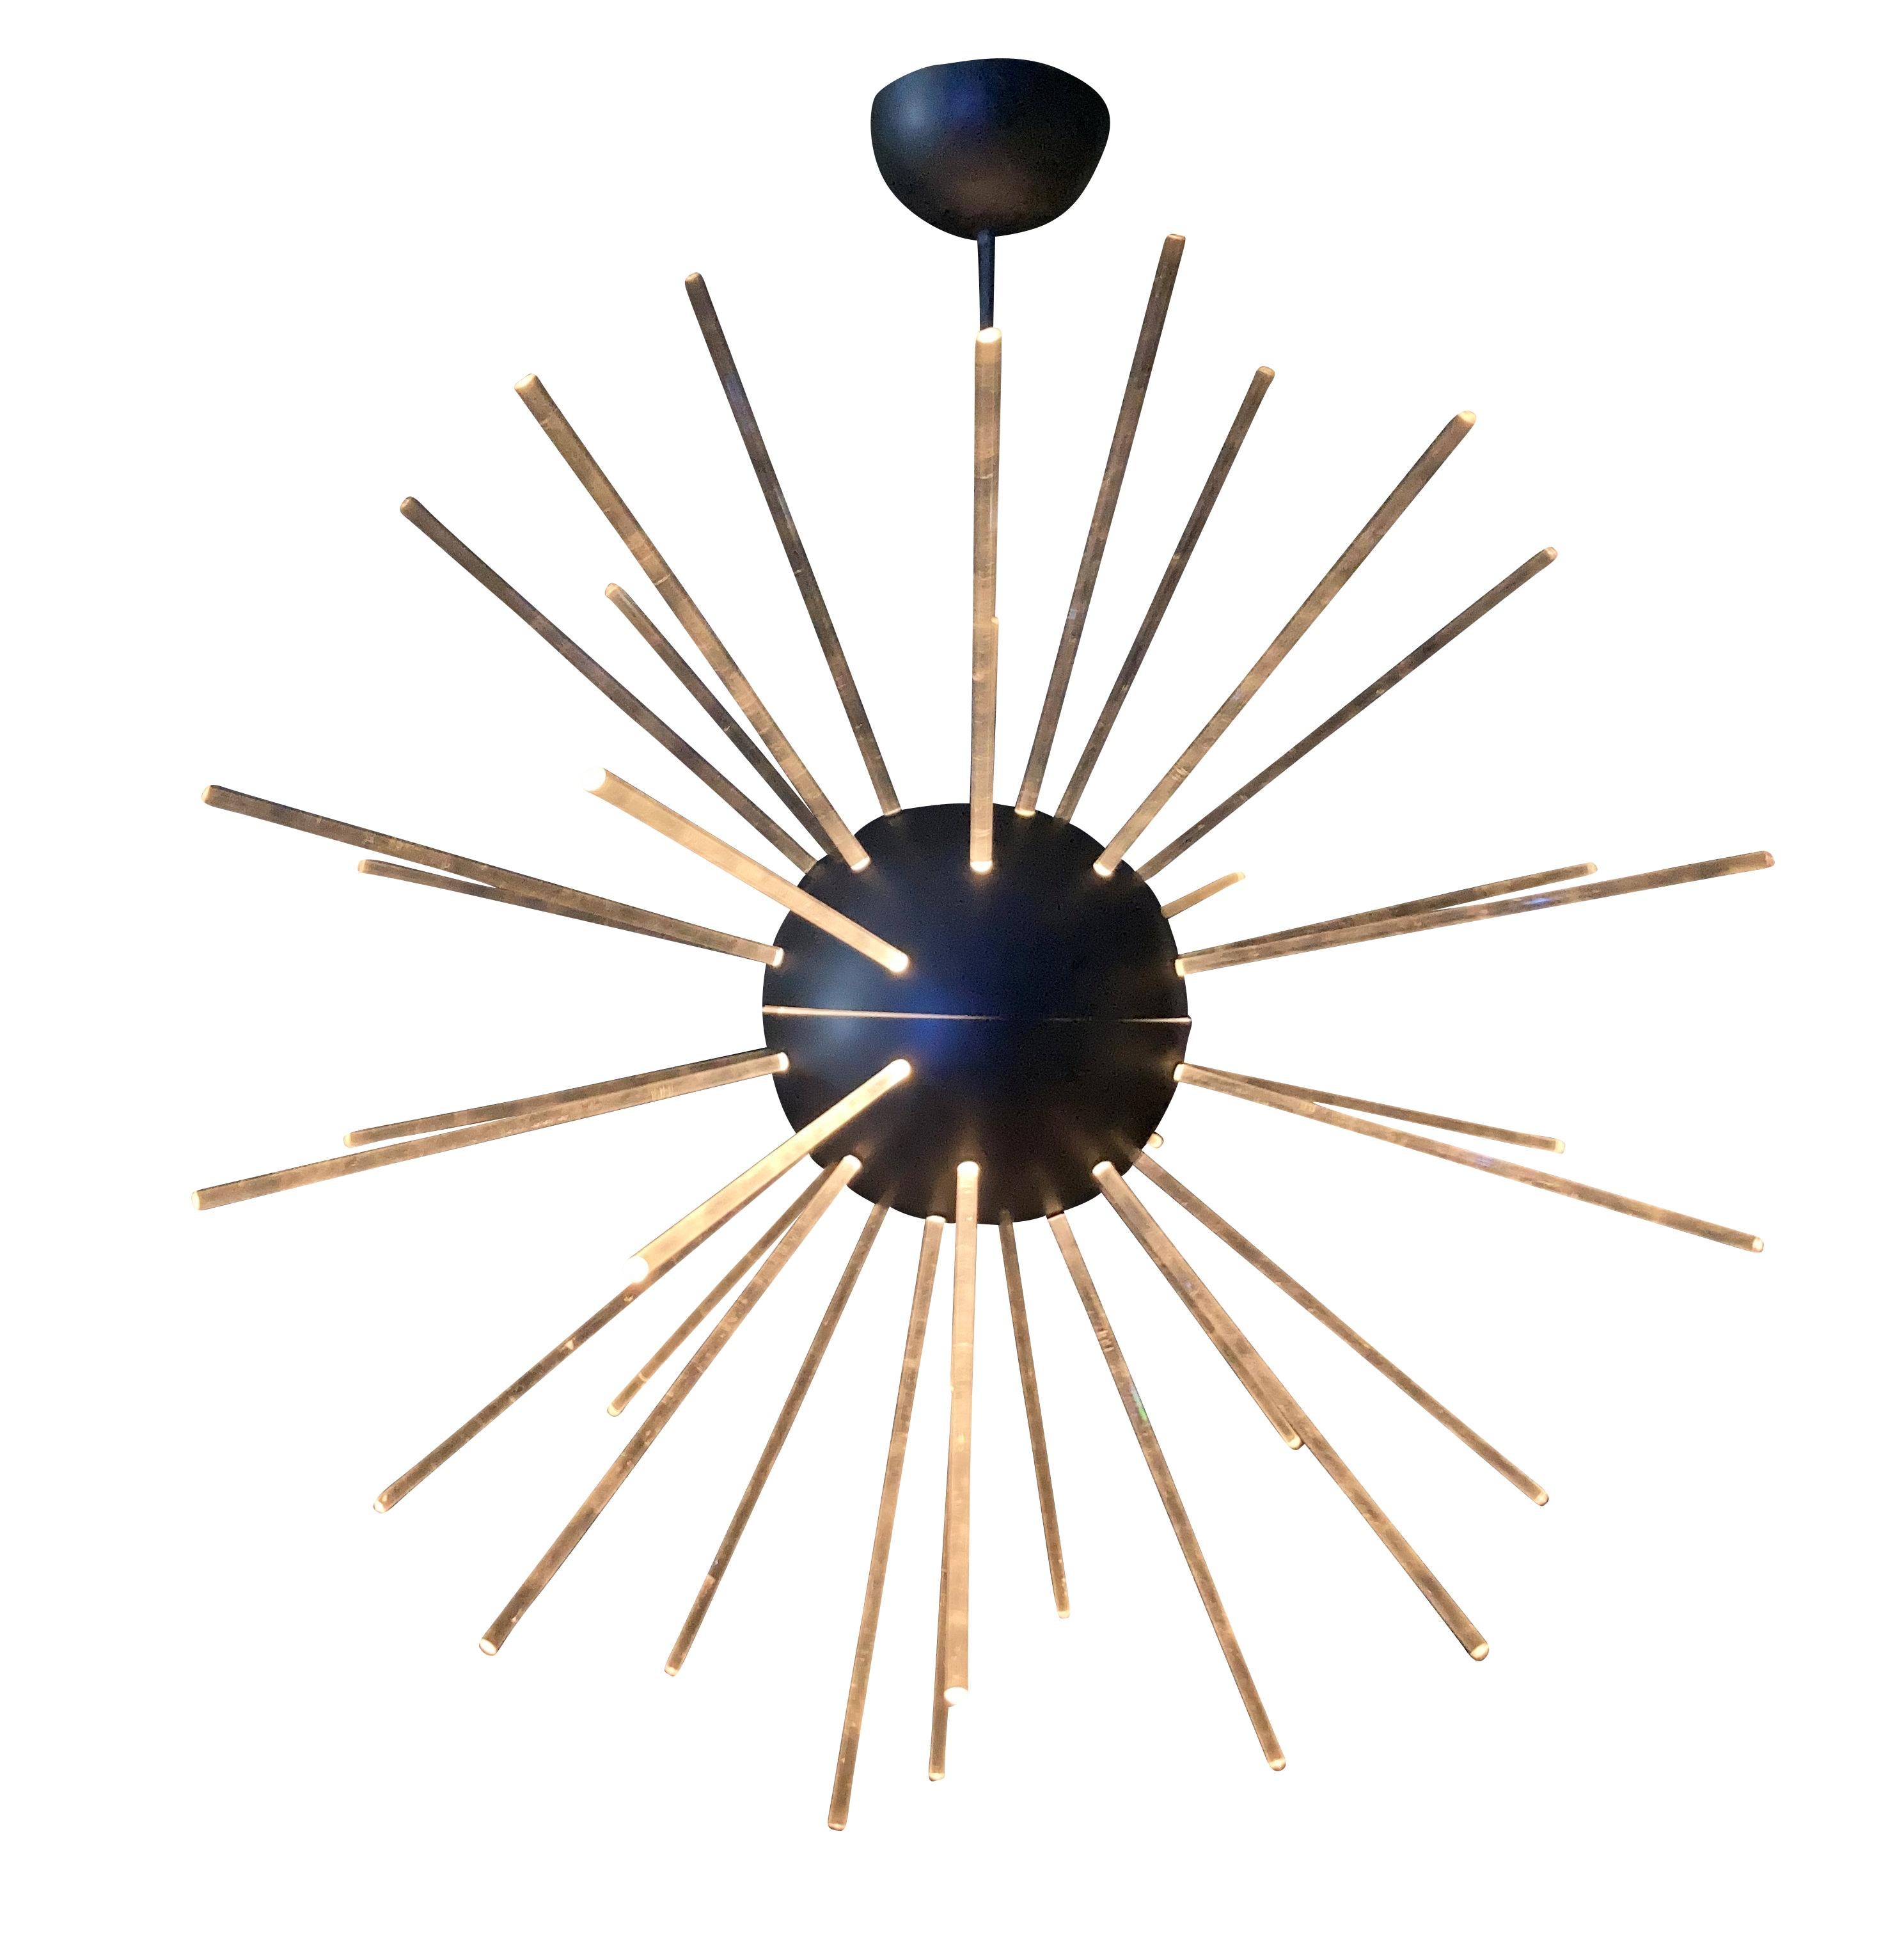 Tin Rare Pendant Light from the Collection I Soli Alchimea, by Alessandro Guerriero